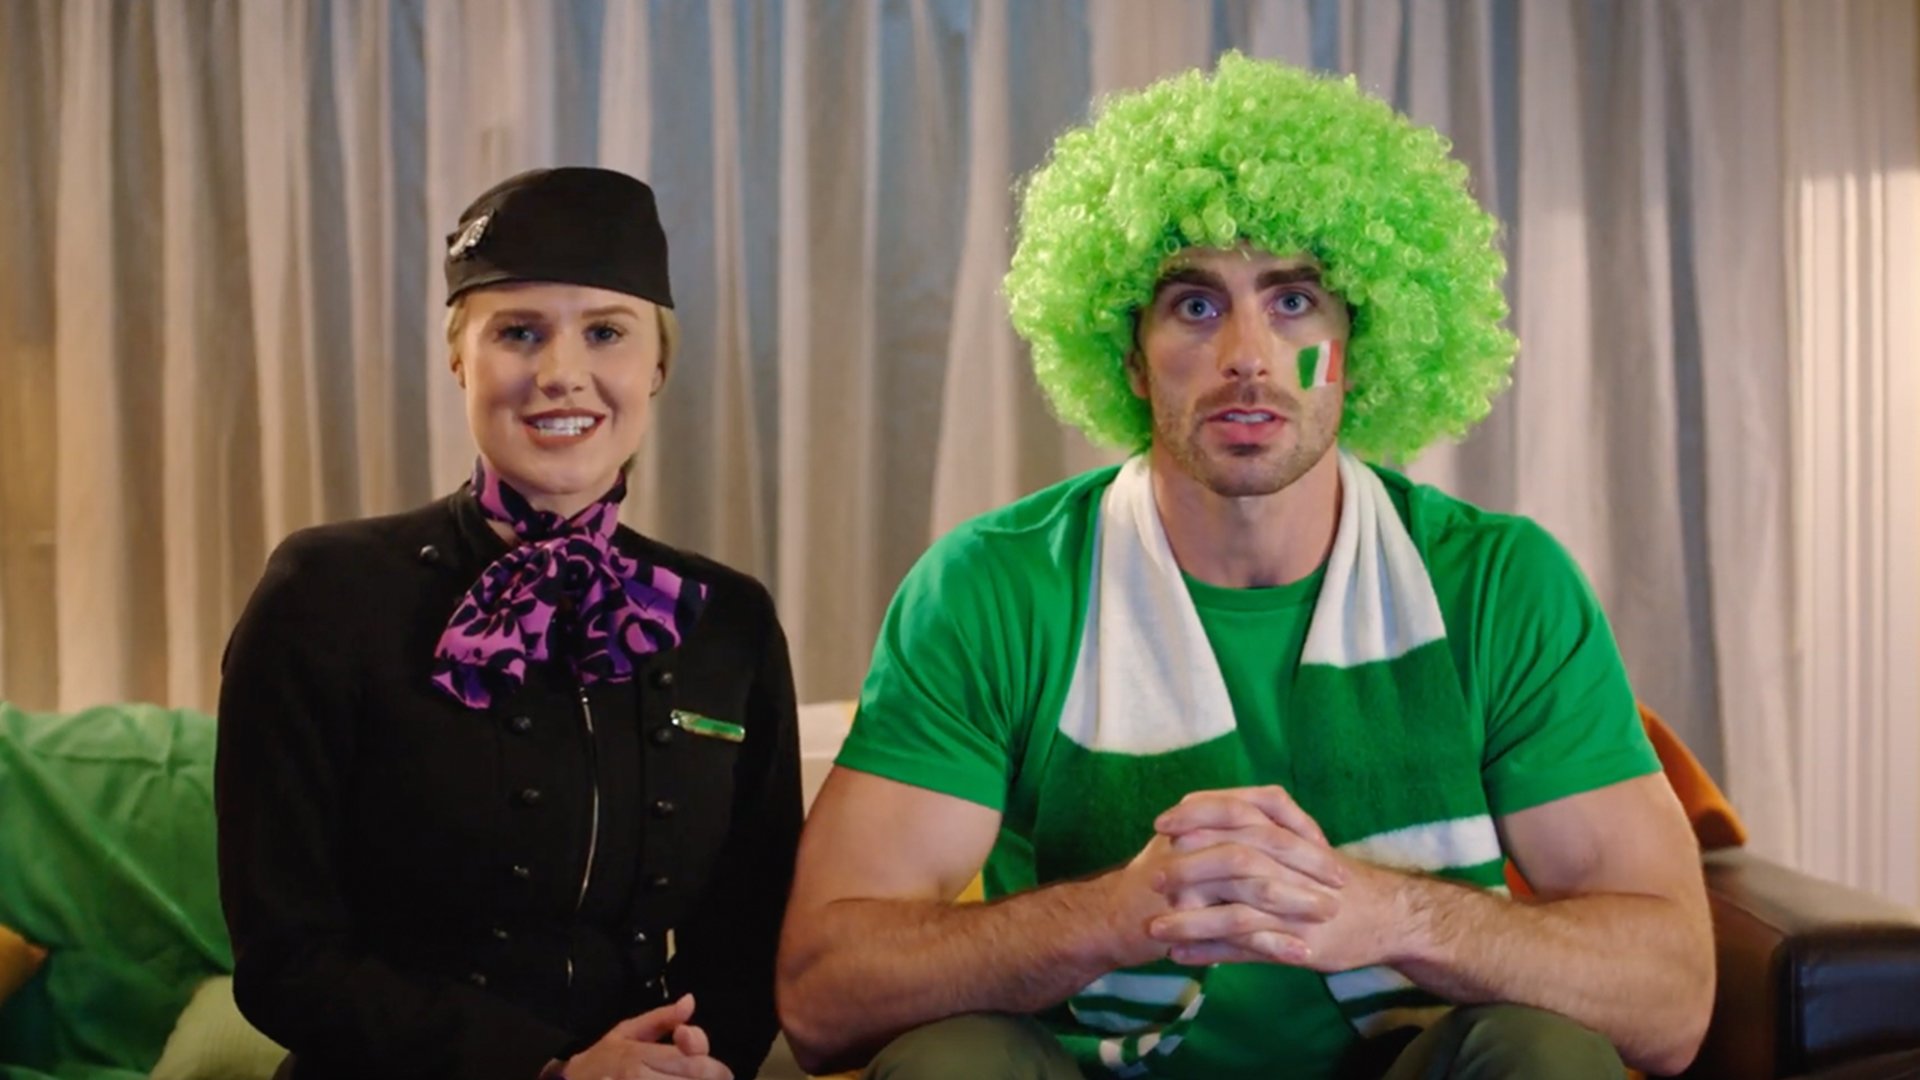 New Zealand are already savaging Irish rugby fans before the game has even started